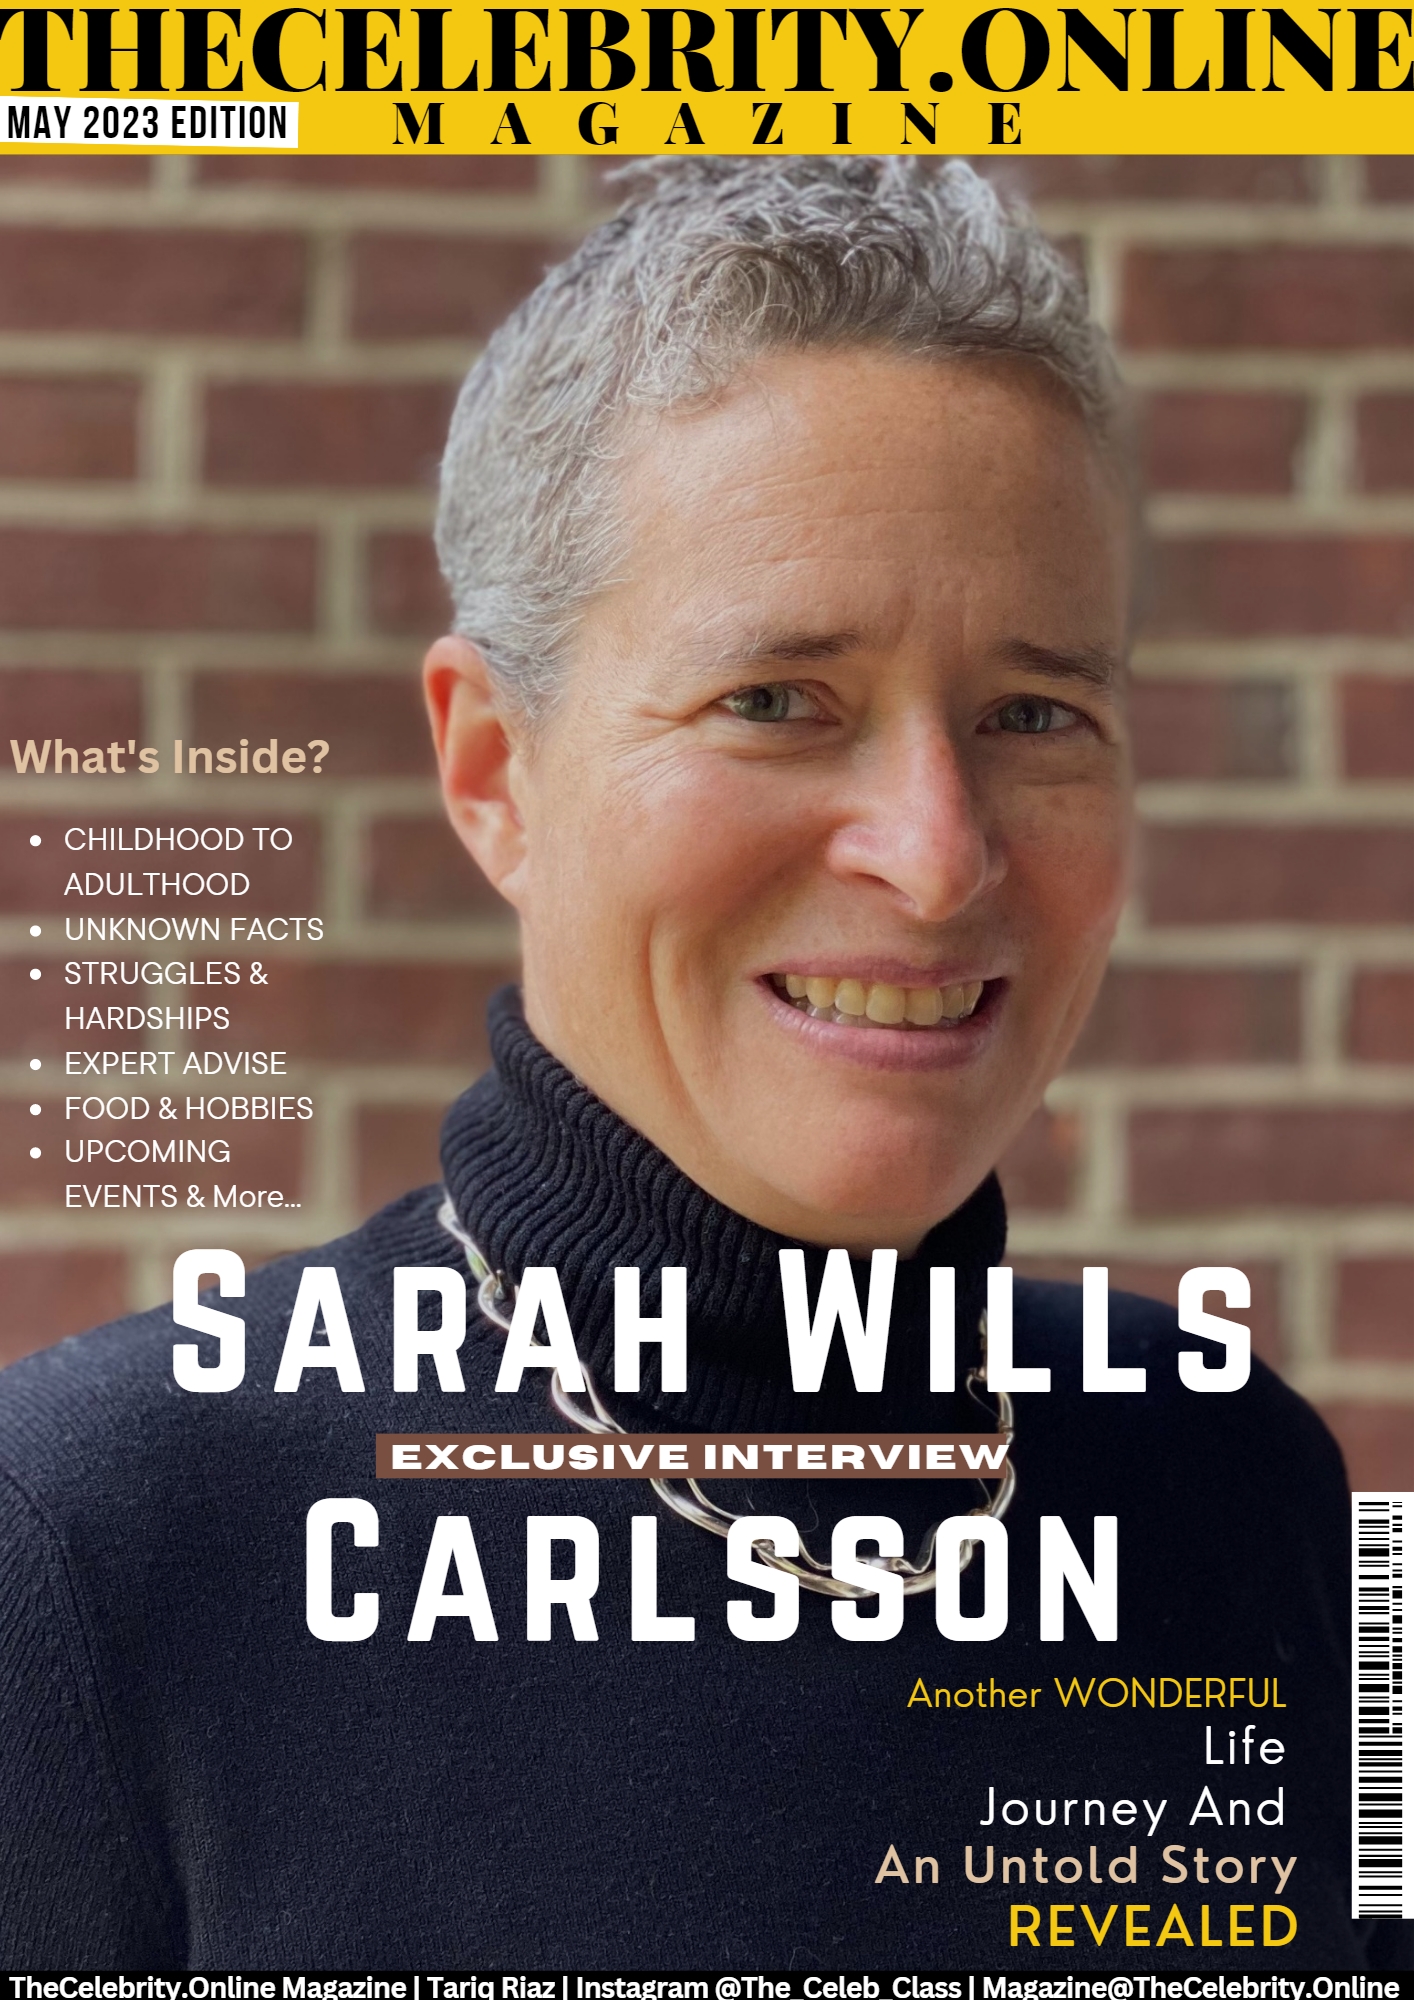 Sarah Wills Carlsson Exclusive Interview – ‘Let Go Of Competing With Others, Find Your Own Unique Purpose’